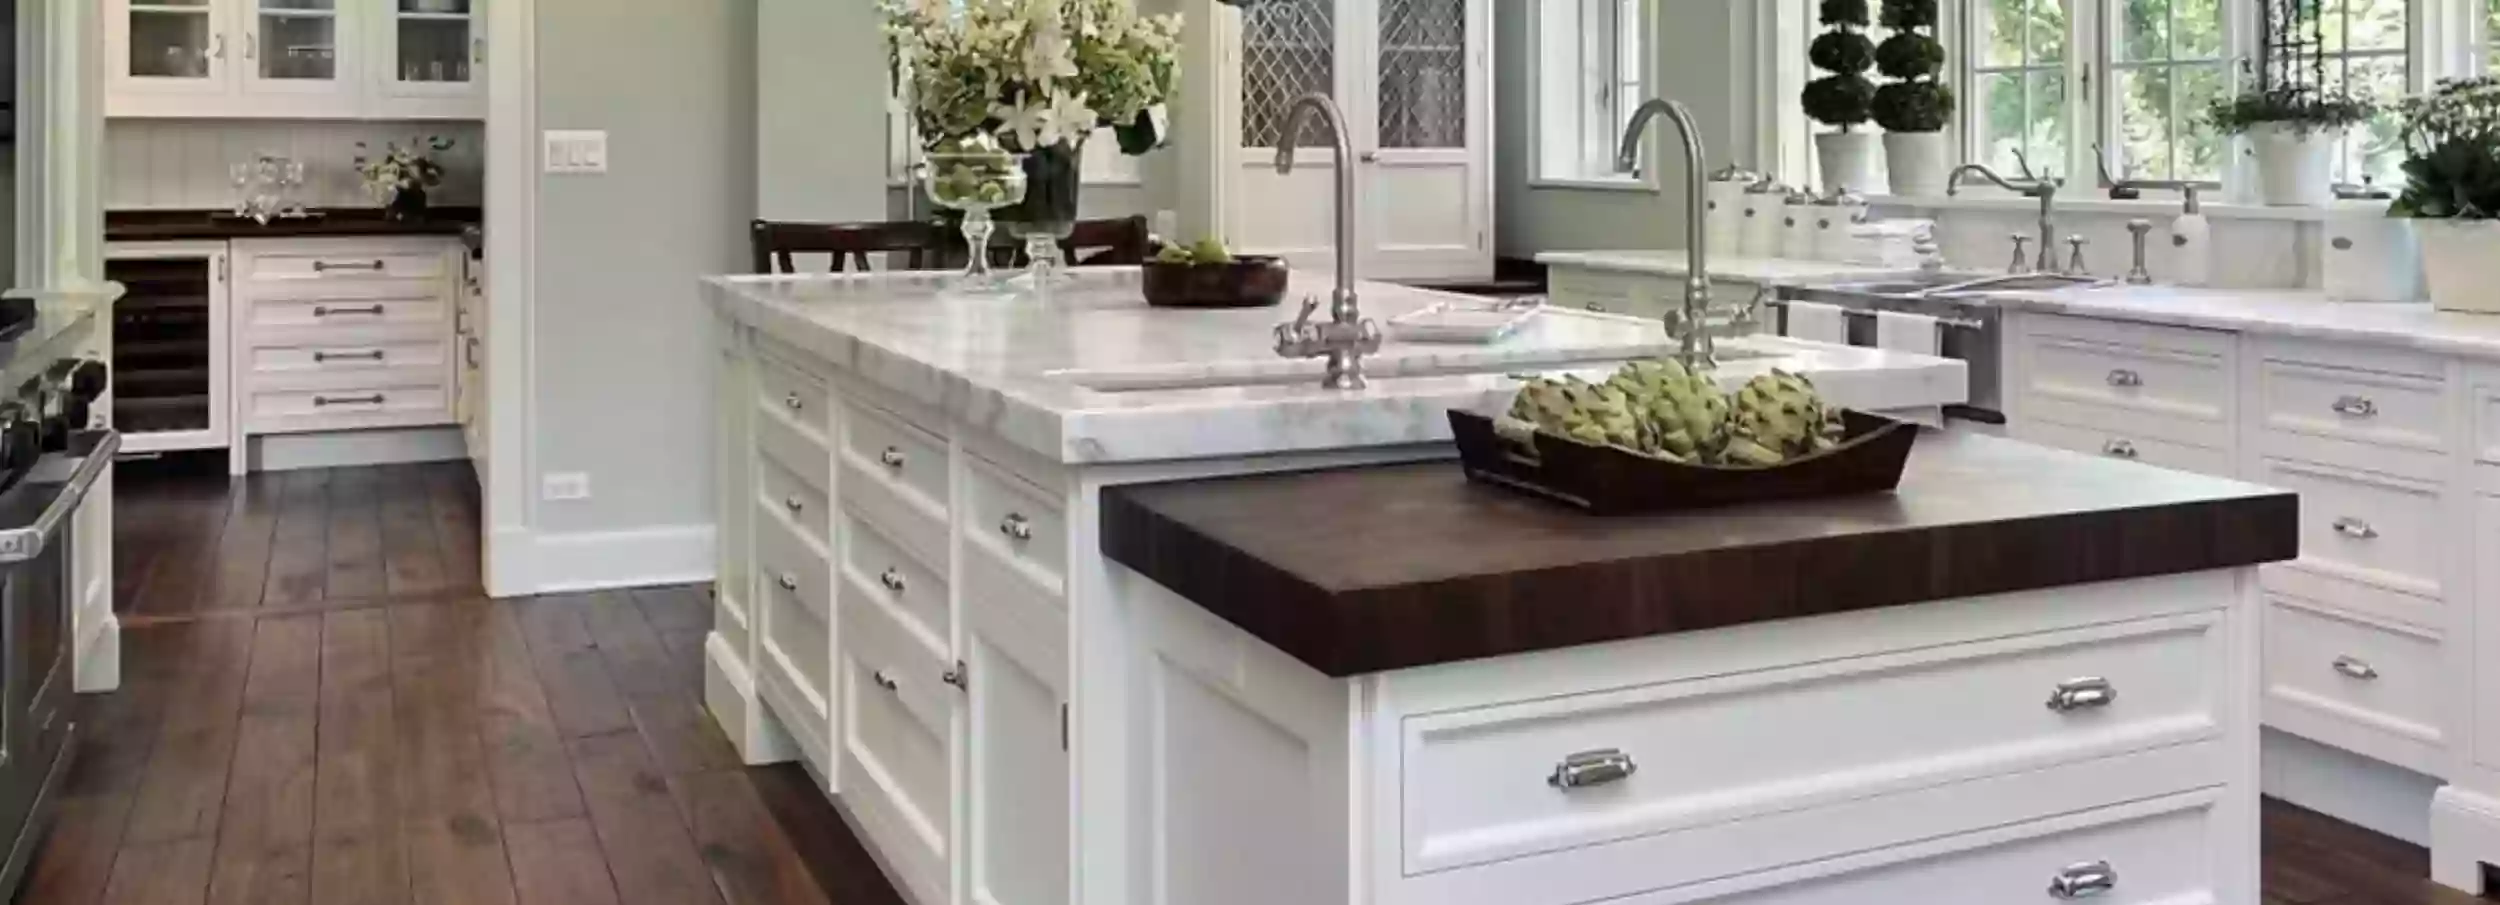 A kitchen painted in white with black countertops.